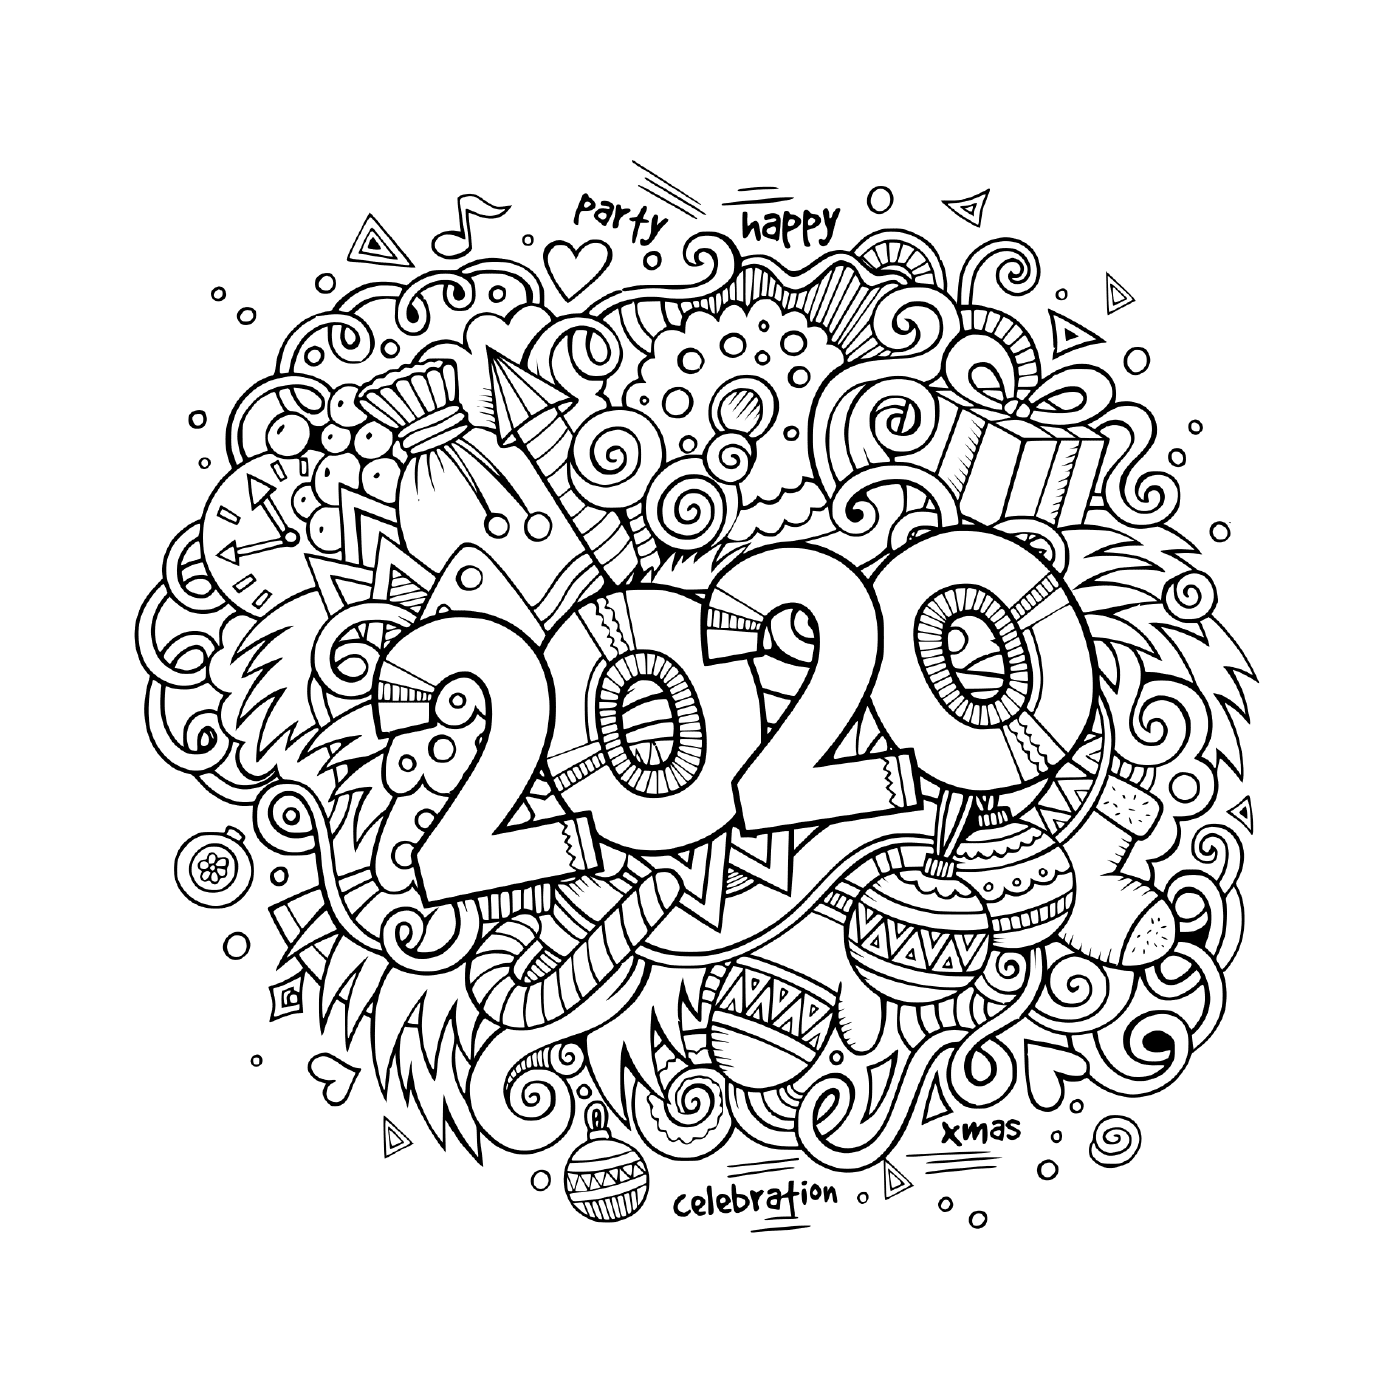 coloriage nouvel an 2020 doodles objects and elements poster design